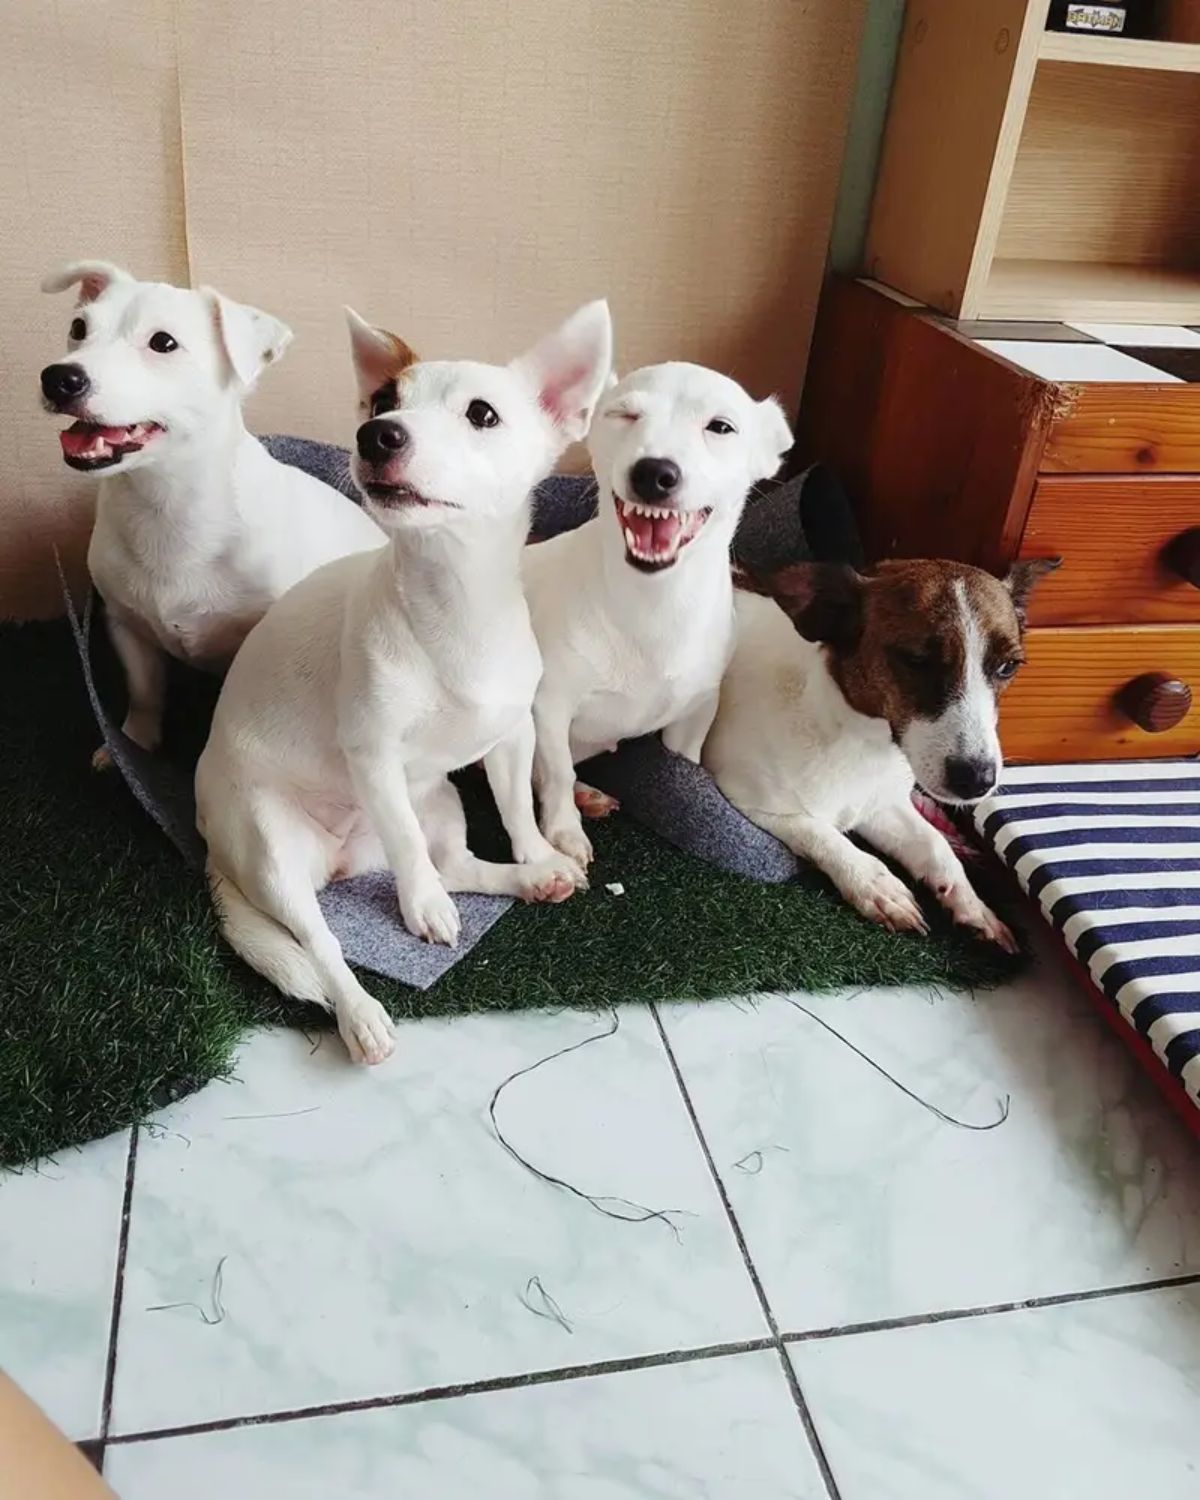 3 white dogs sitting with a white black and brown dog